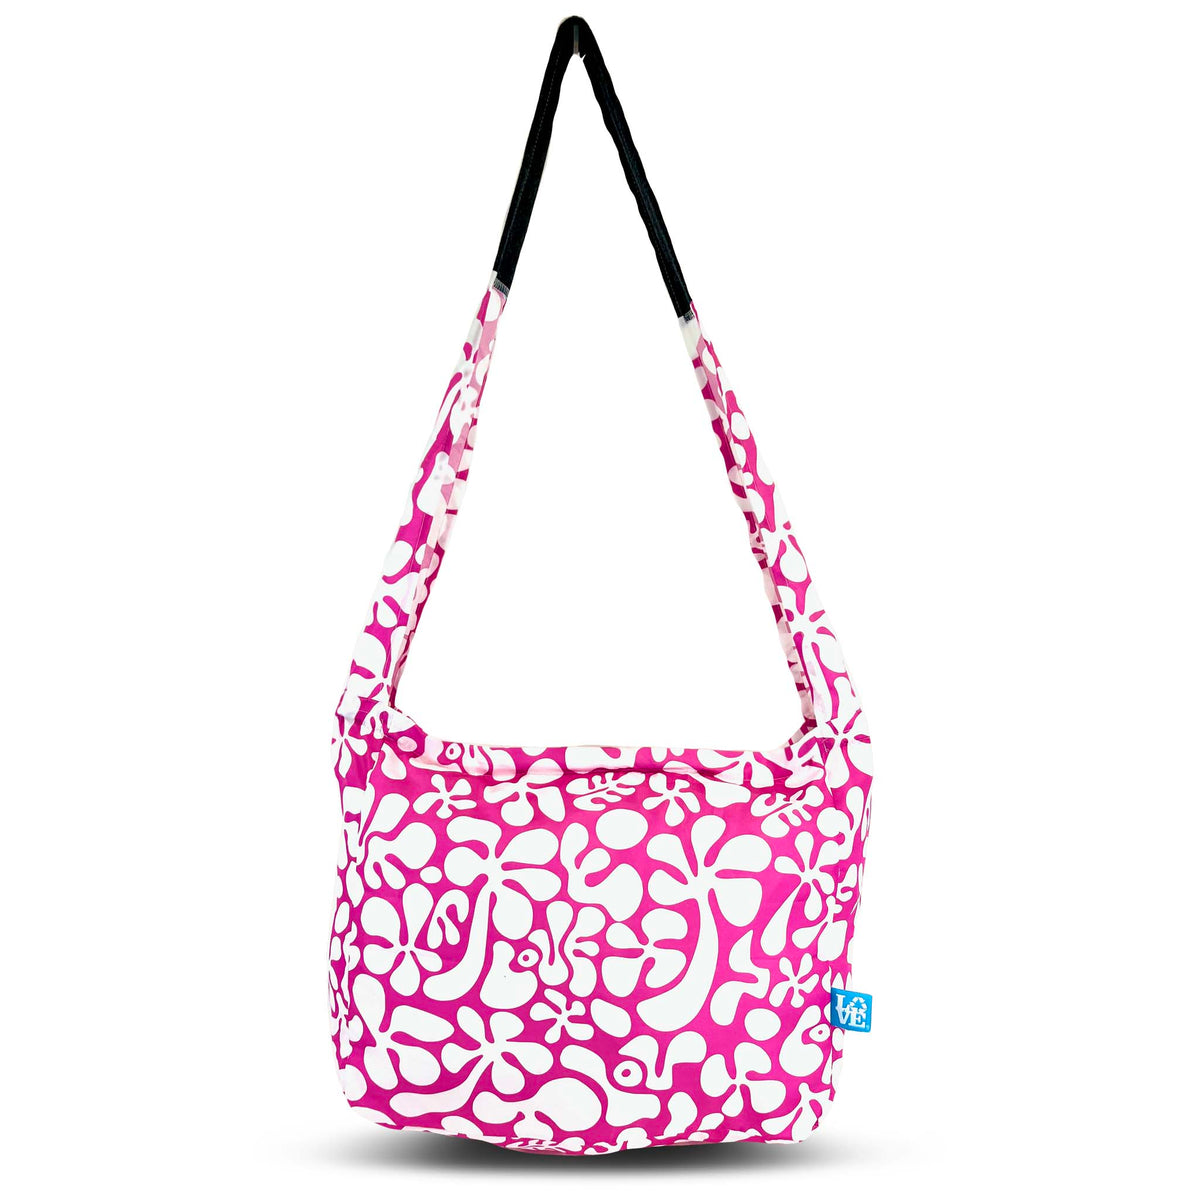 Crossbody Stash It Tote Bag -  Groovy LOVE Pink (with extra long strap)